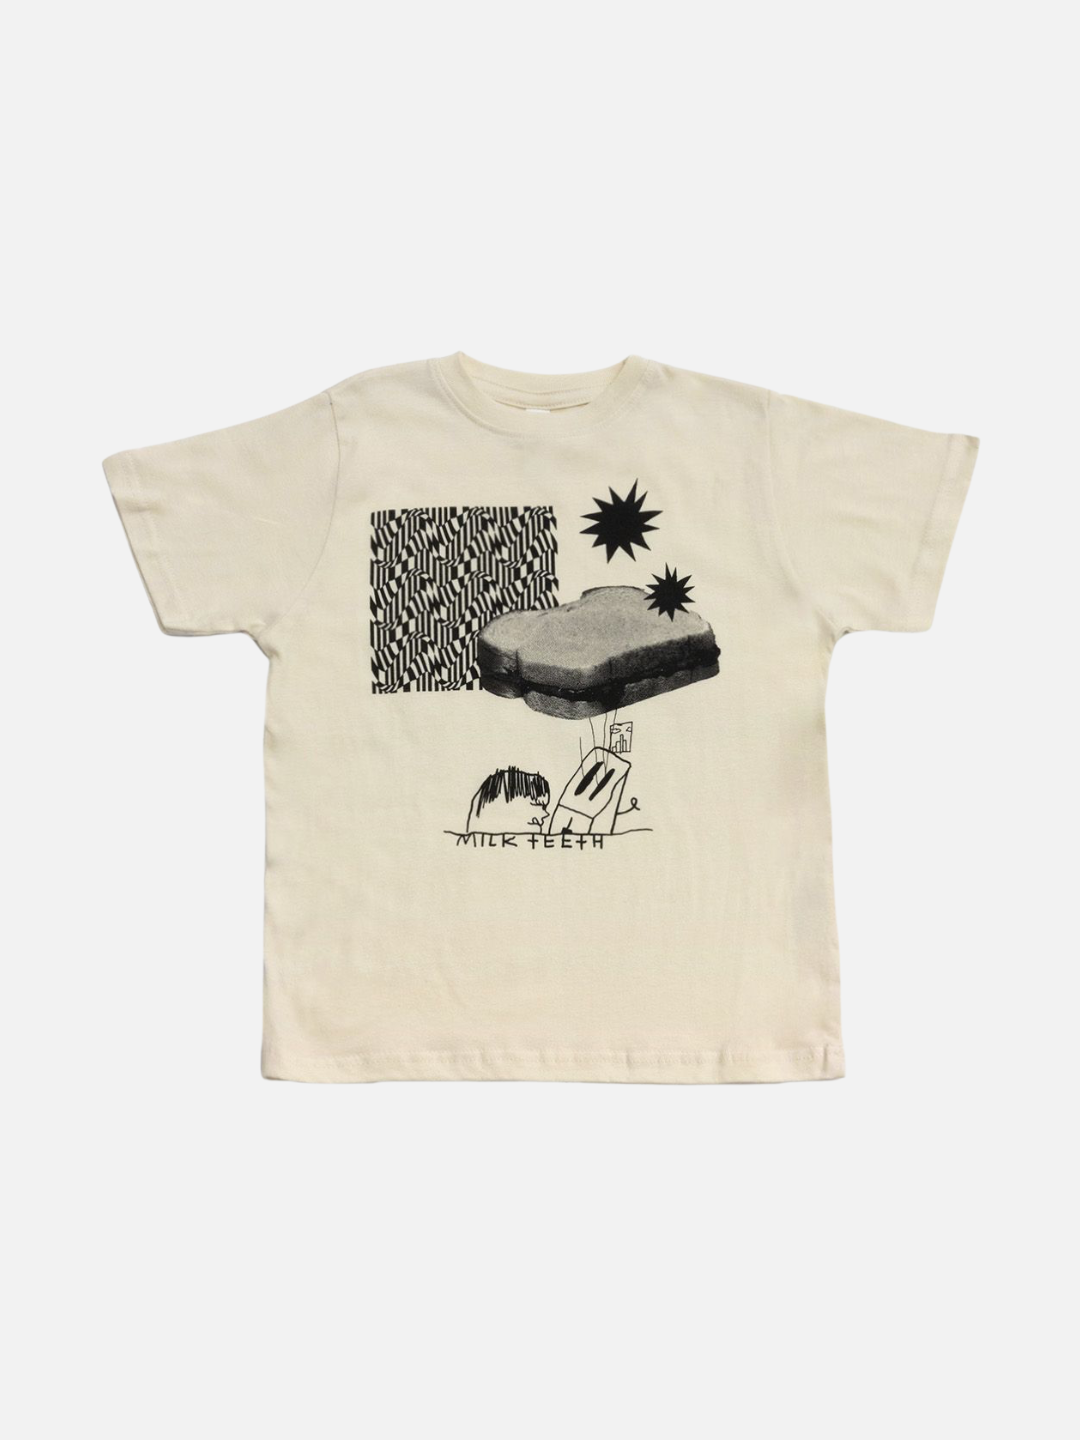 A kids' tee shirt in cream, printed with various patterns in black, a PBJ sandwich, a toaster, and the words Milk Teeth